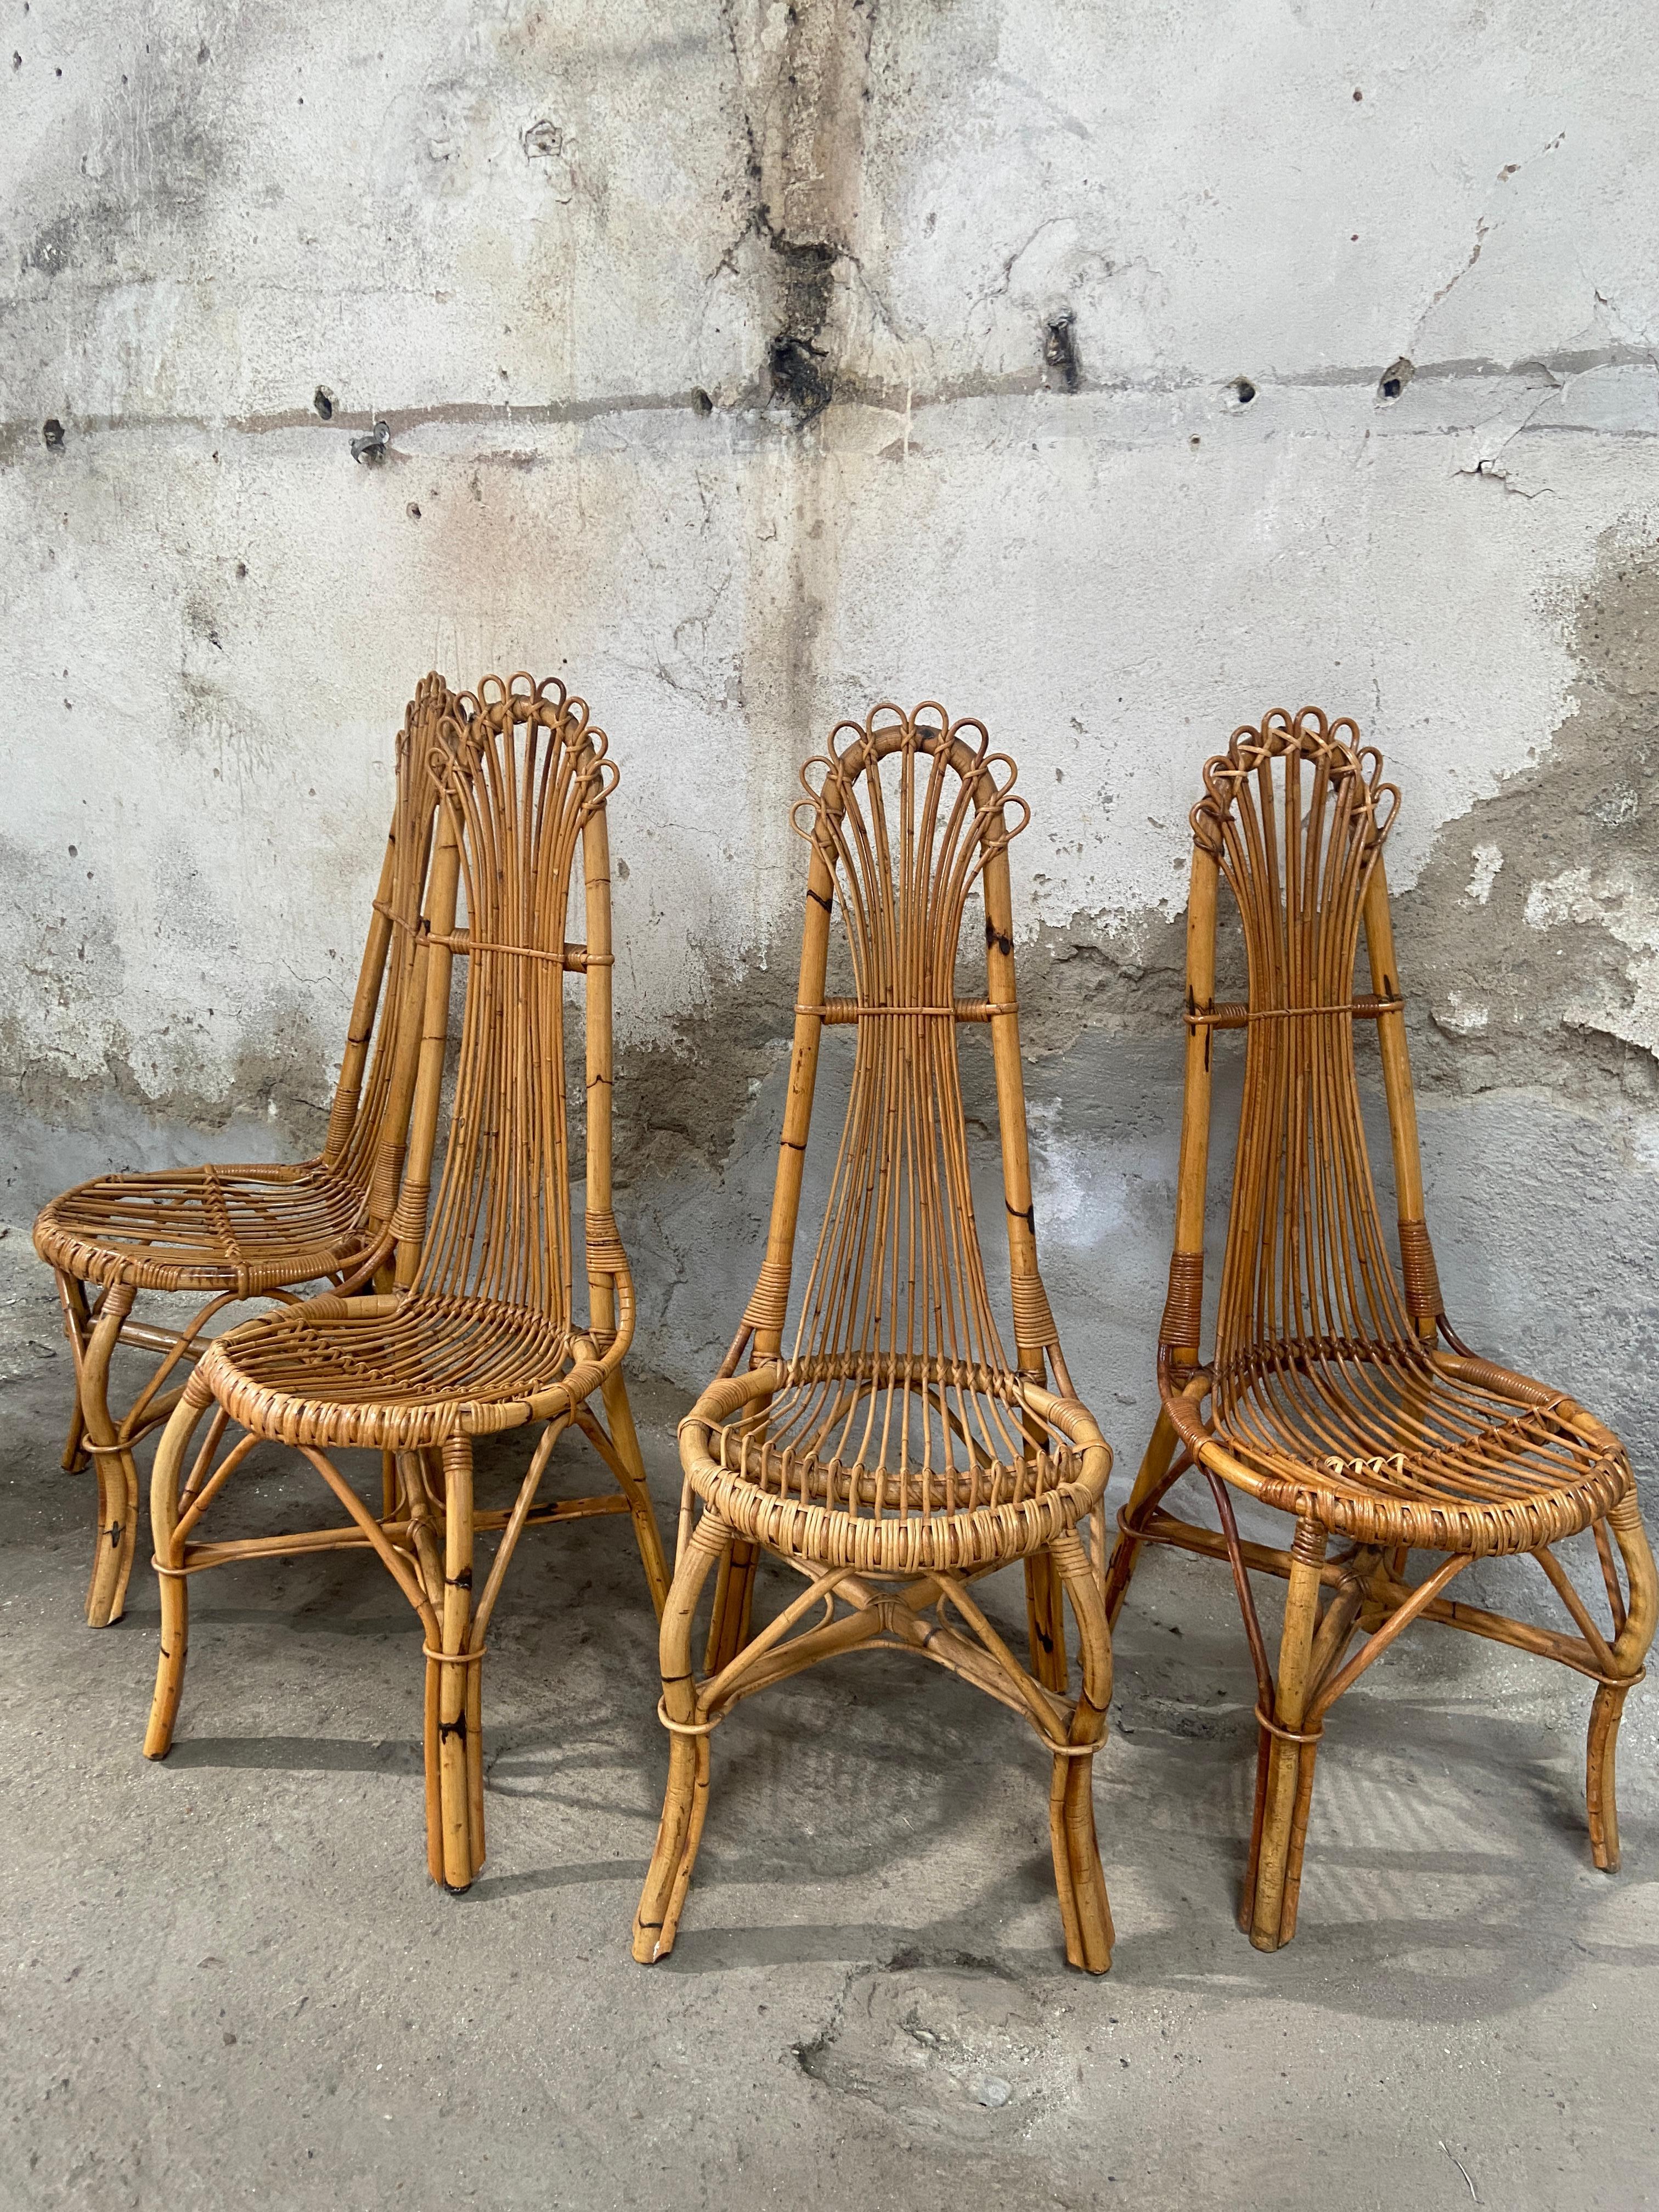 Late 20th Century Mid-Century Modern Set of 4 Bamboo Chairs from the French Riviera, 1970s